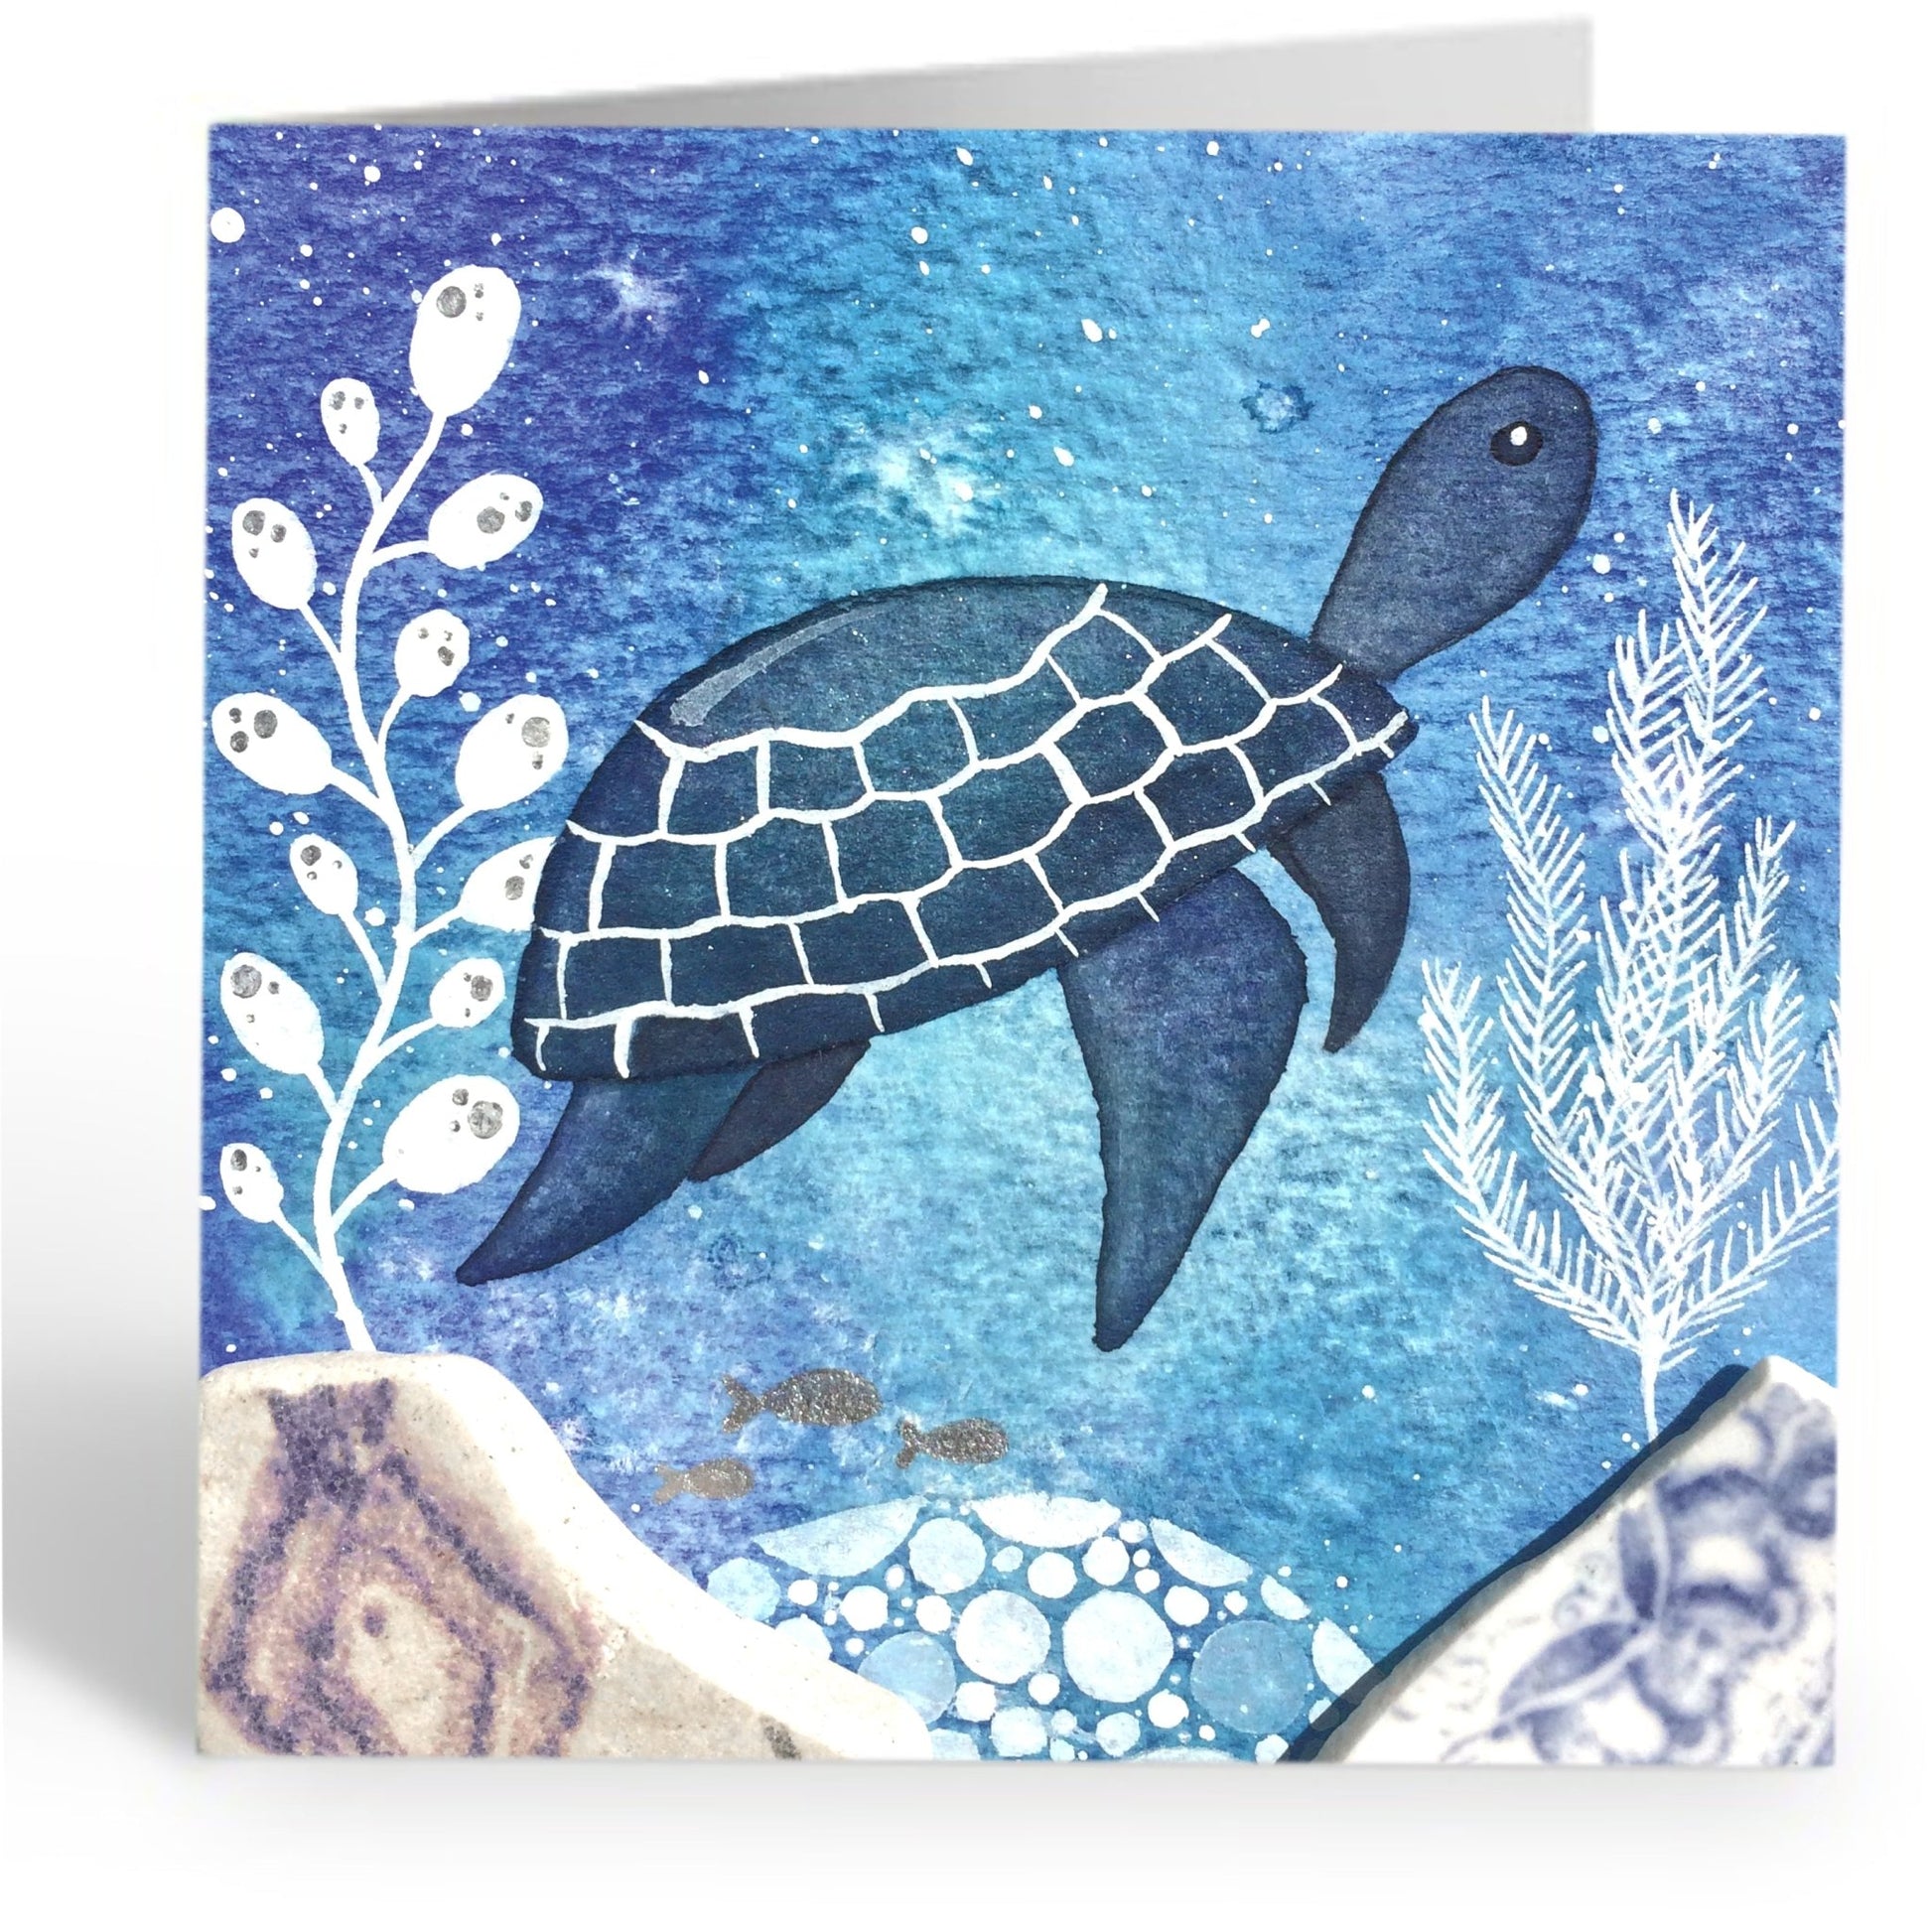 Greetings Cards (Pack of 4) "Under the Waves" Whale, Jellyfish, Octopus, Turtle - East Neuk Beach Crafts